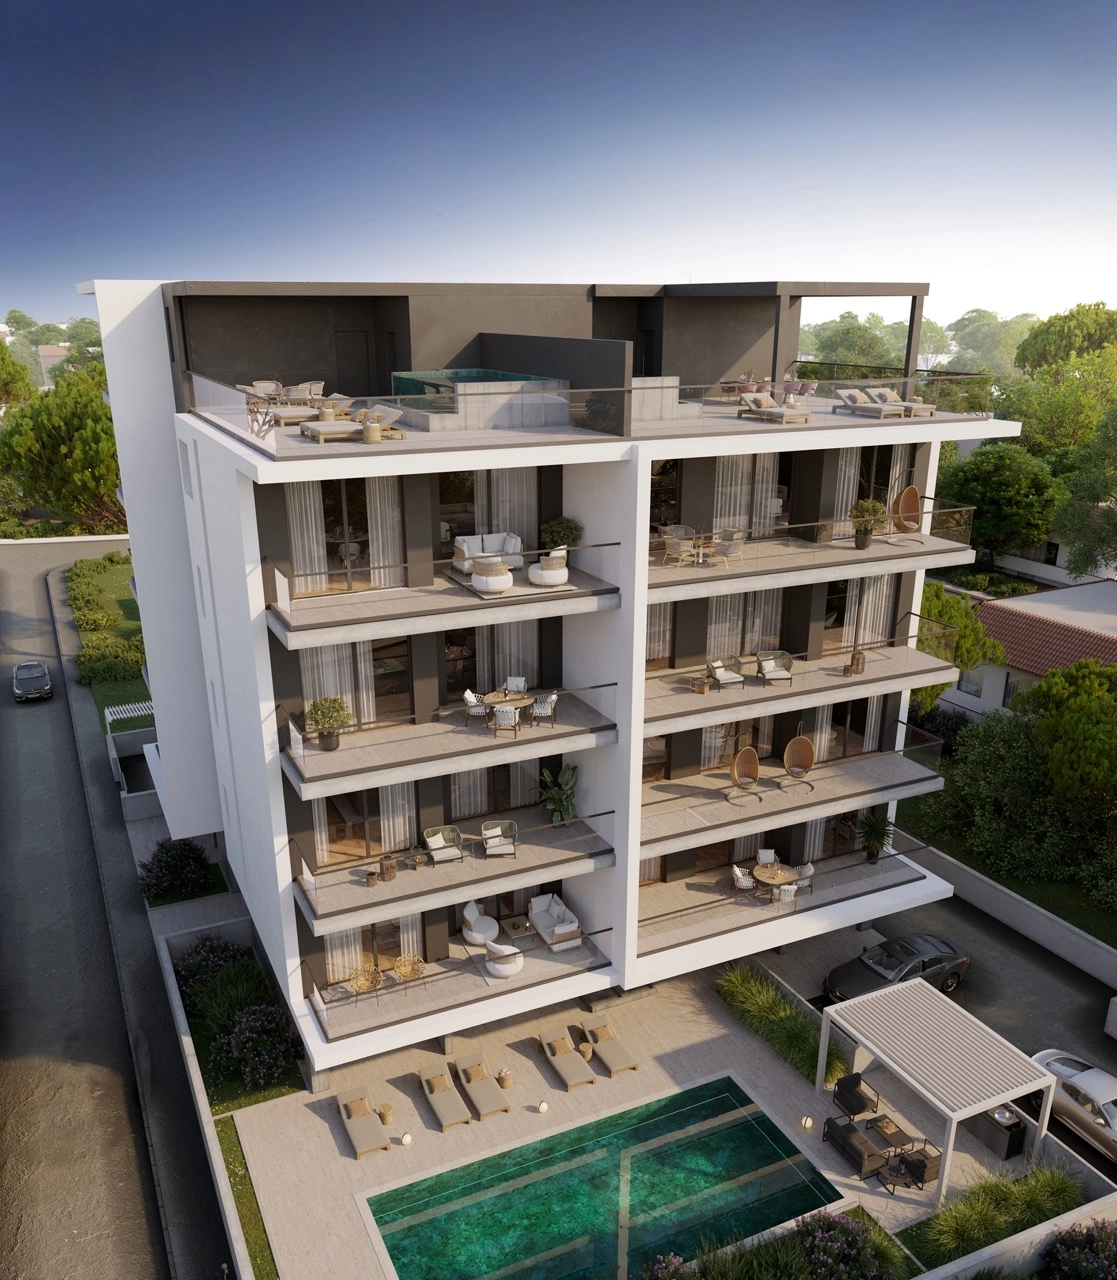 3 Bedroom Apartment for Sale in Germasogeia, Limassol District